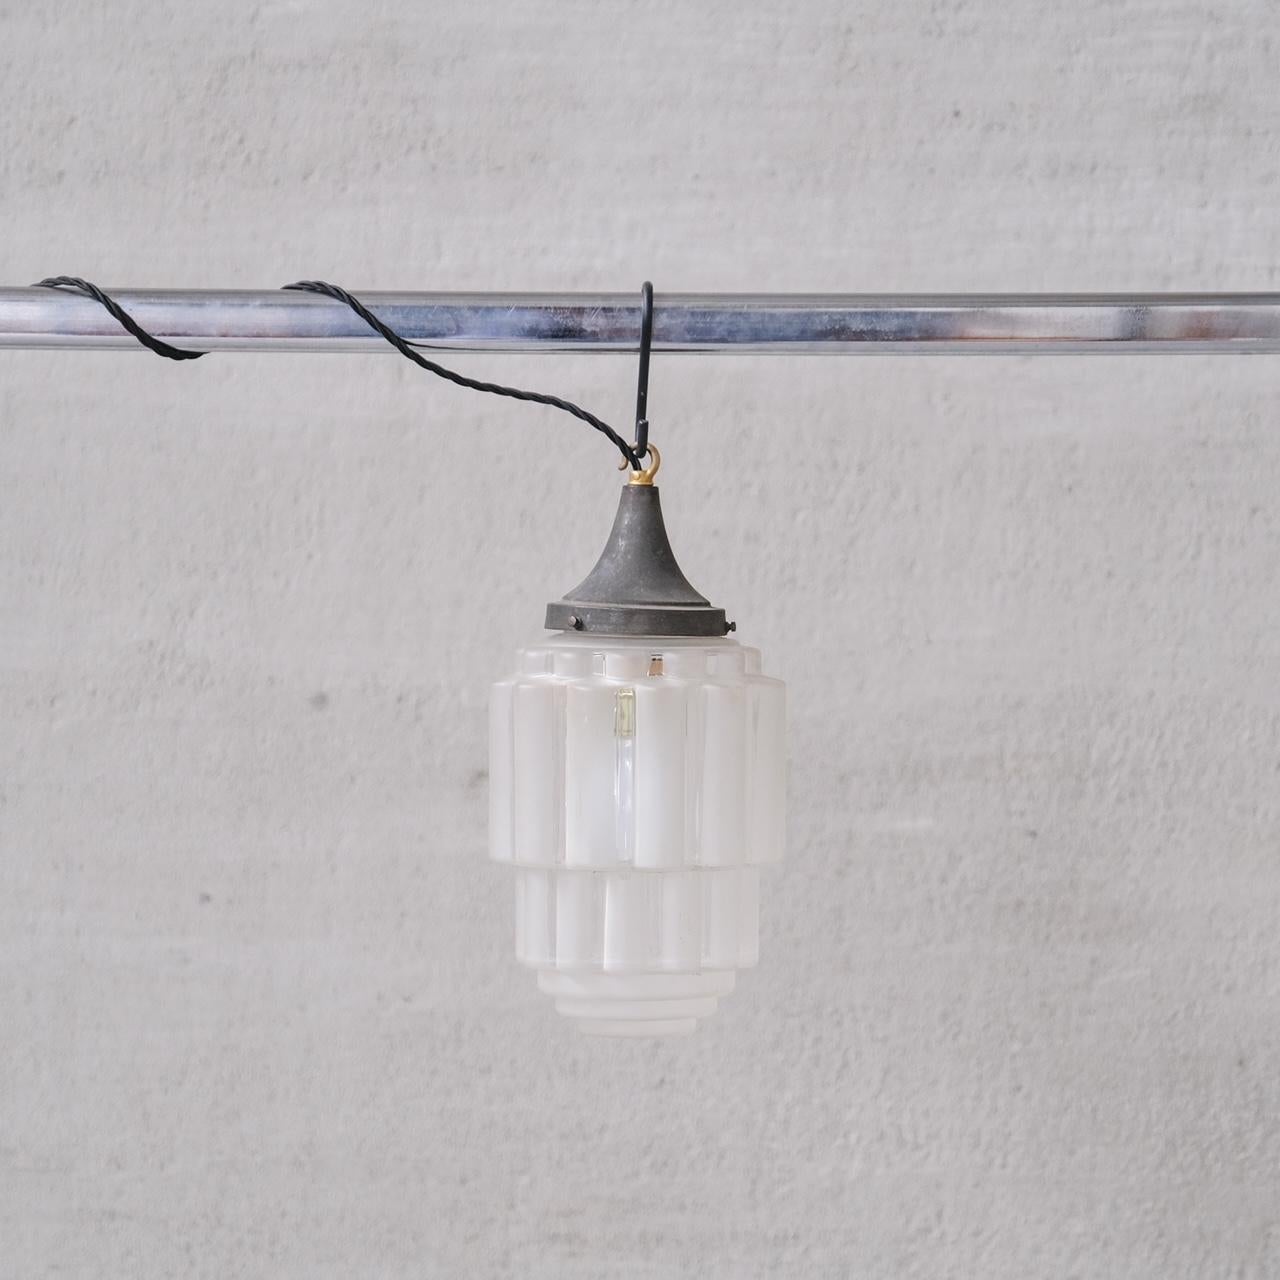 A two tone, clear and opaque glass pendant light, often labelled as 'sky scraper' pendants.

France, c1920s.

Stepped design.

No chain or rose was retained, however they are easy to source online.

Good vintage condtion, re-wired and PAT